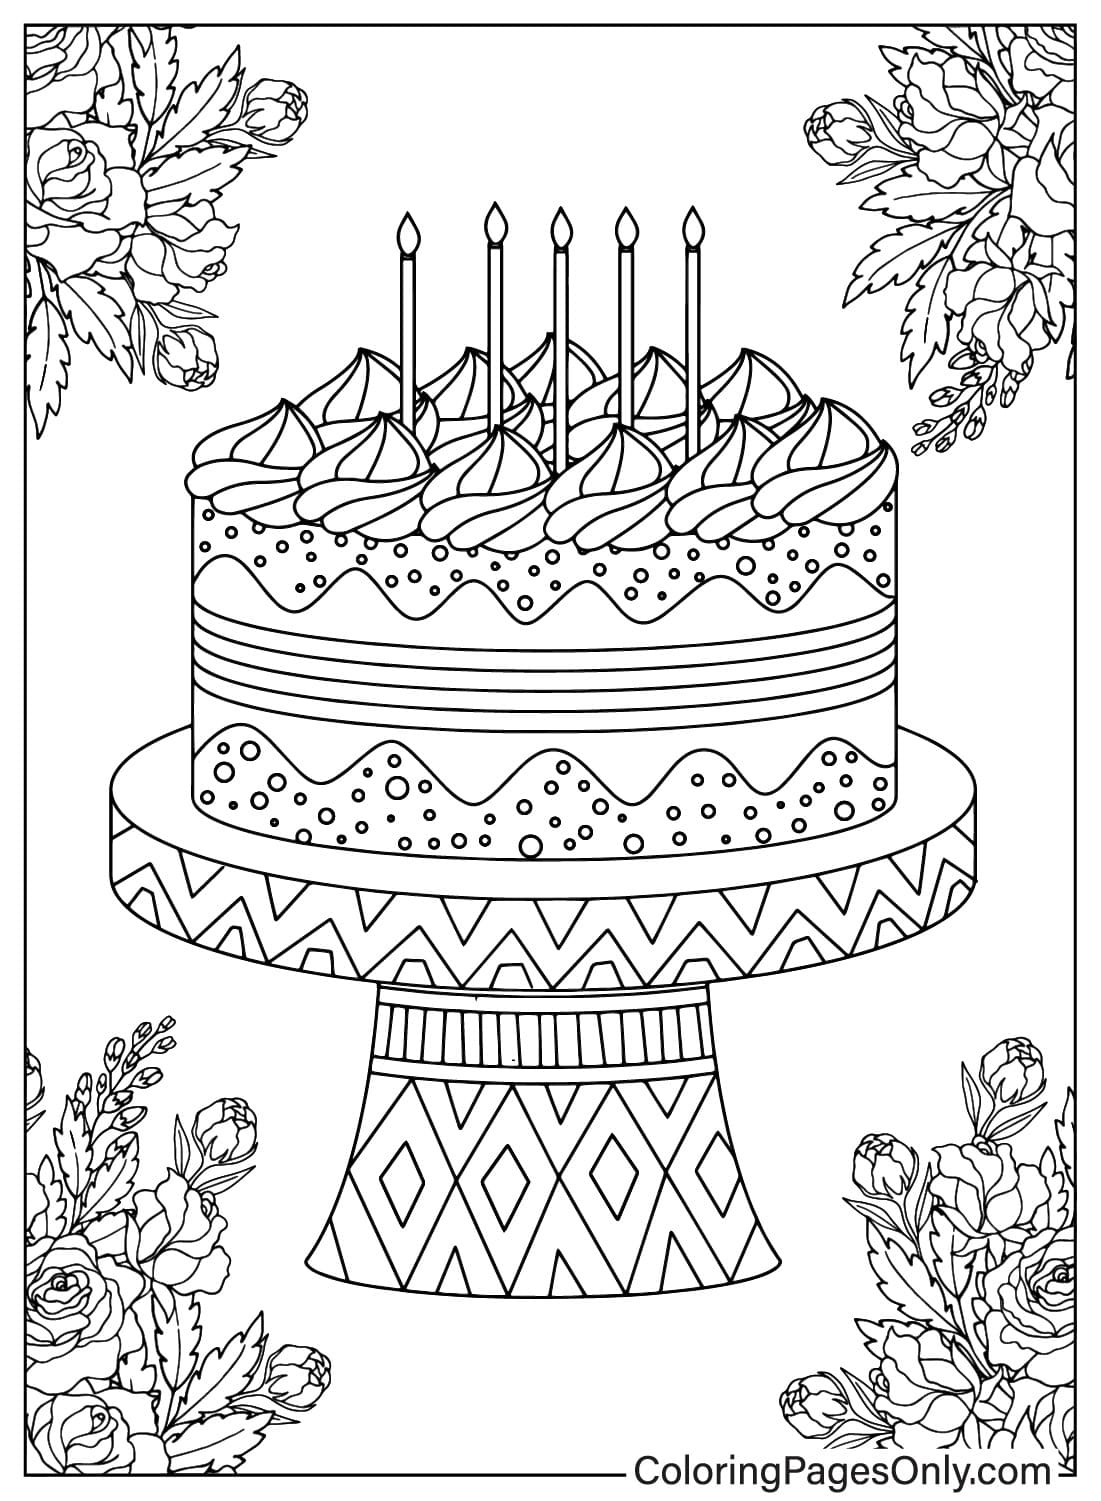 Printable Birthday Cake Coloring Page from Birthday Cake